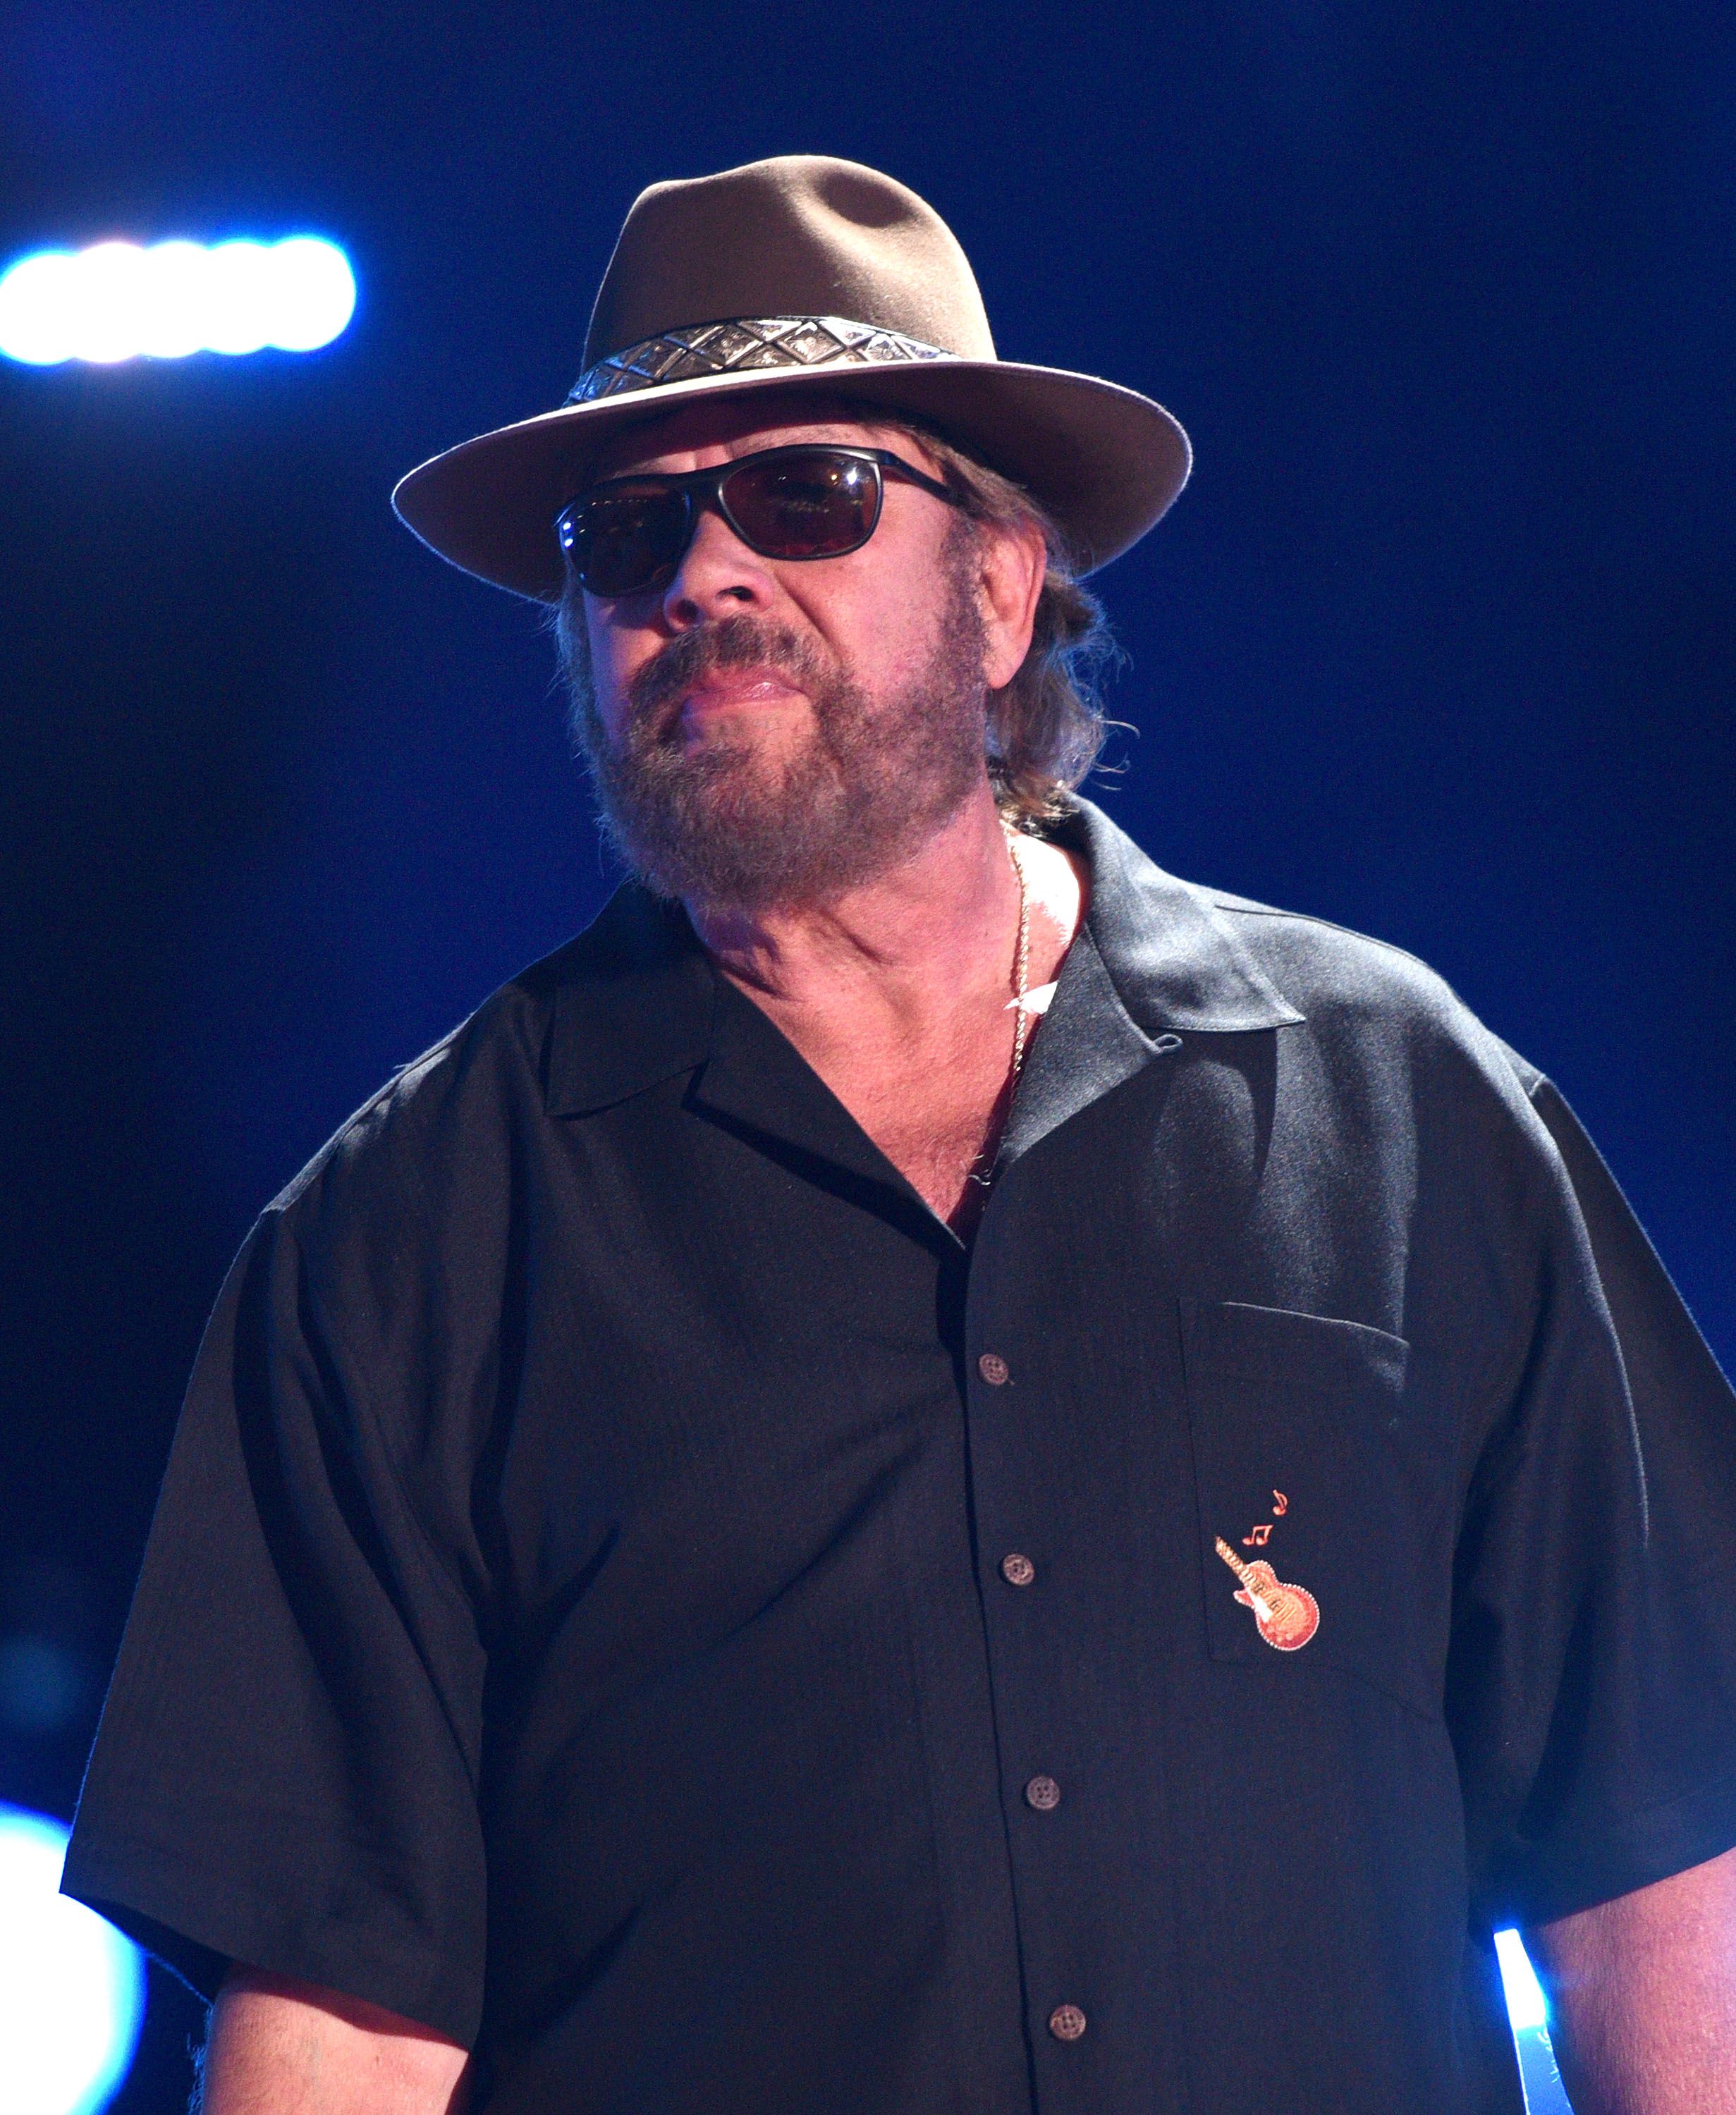 Hank Williams Jr. performs at CMA Music Festival on June 10, 2016 in Nashville, Tennessee | Photo: Getty Images 